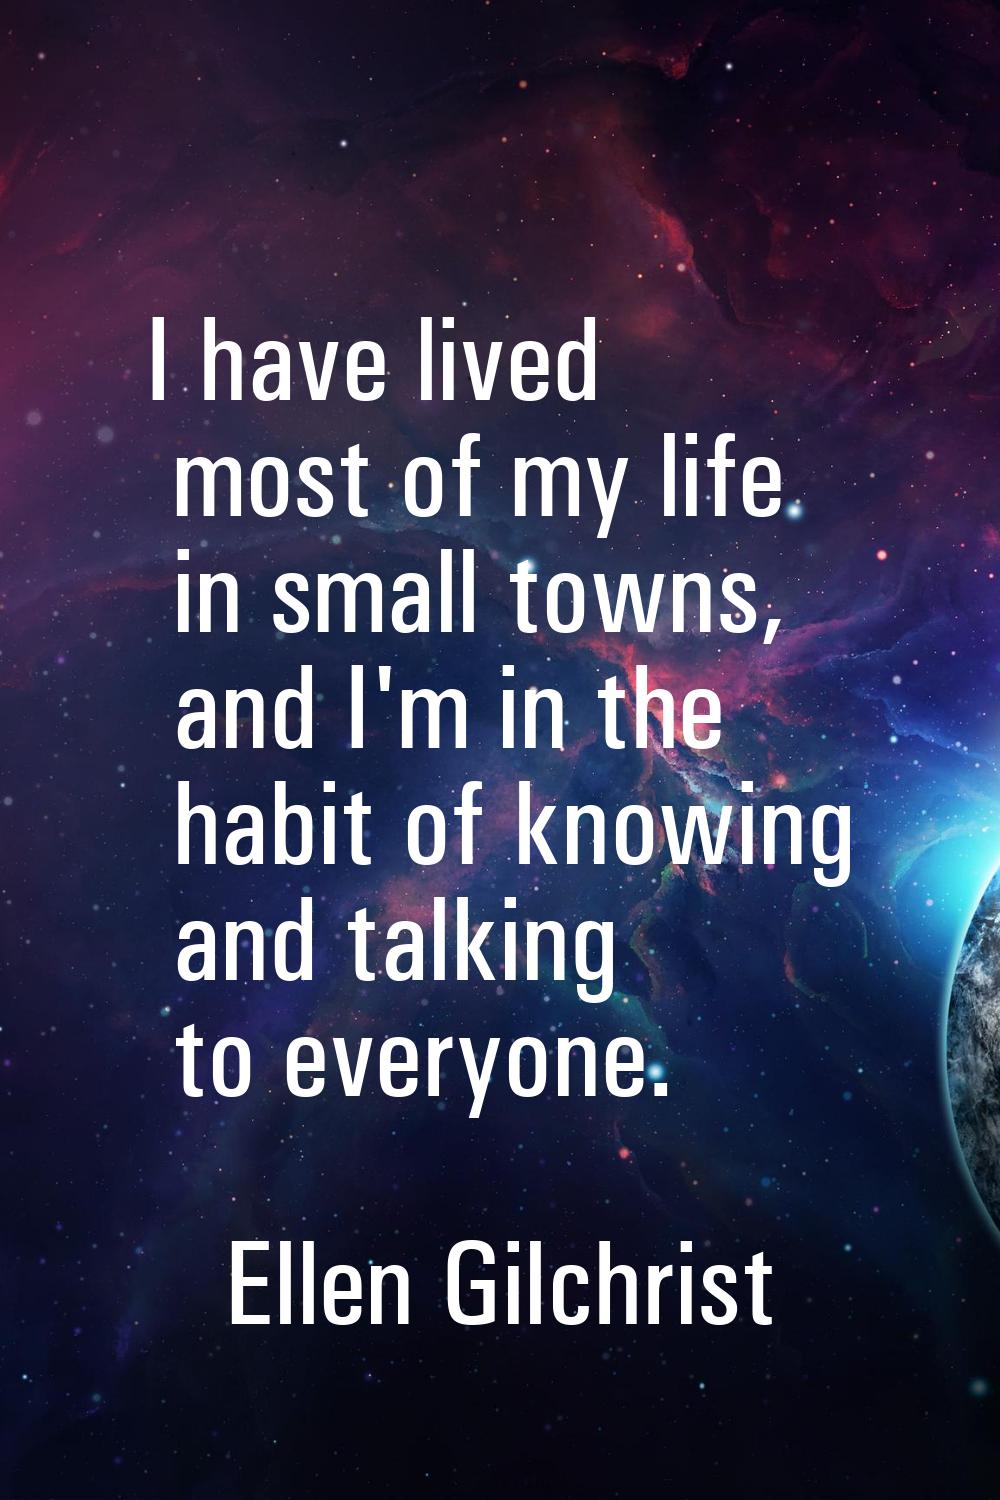 I have lived most of my life in small towns, and I'm in the habit of knowing and talking to everyon